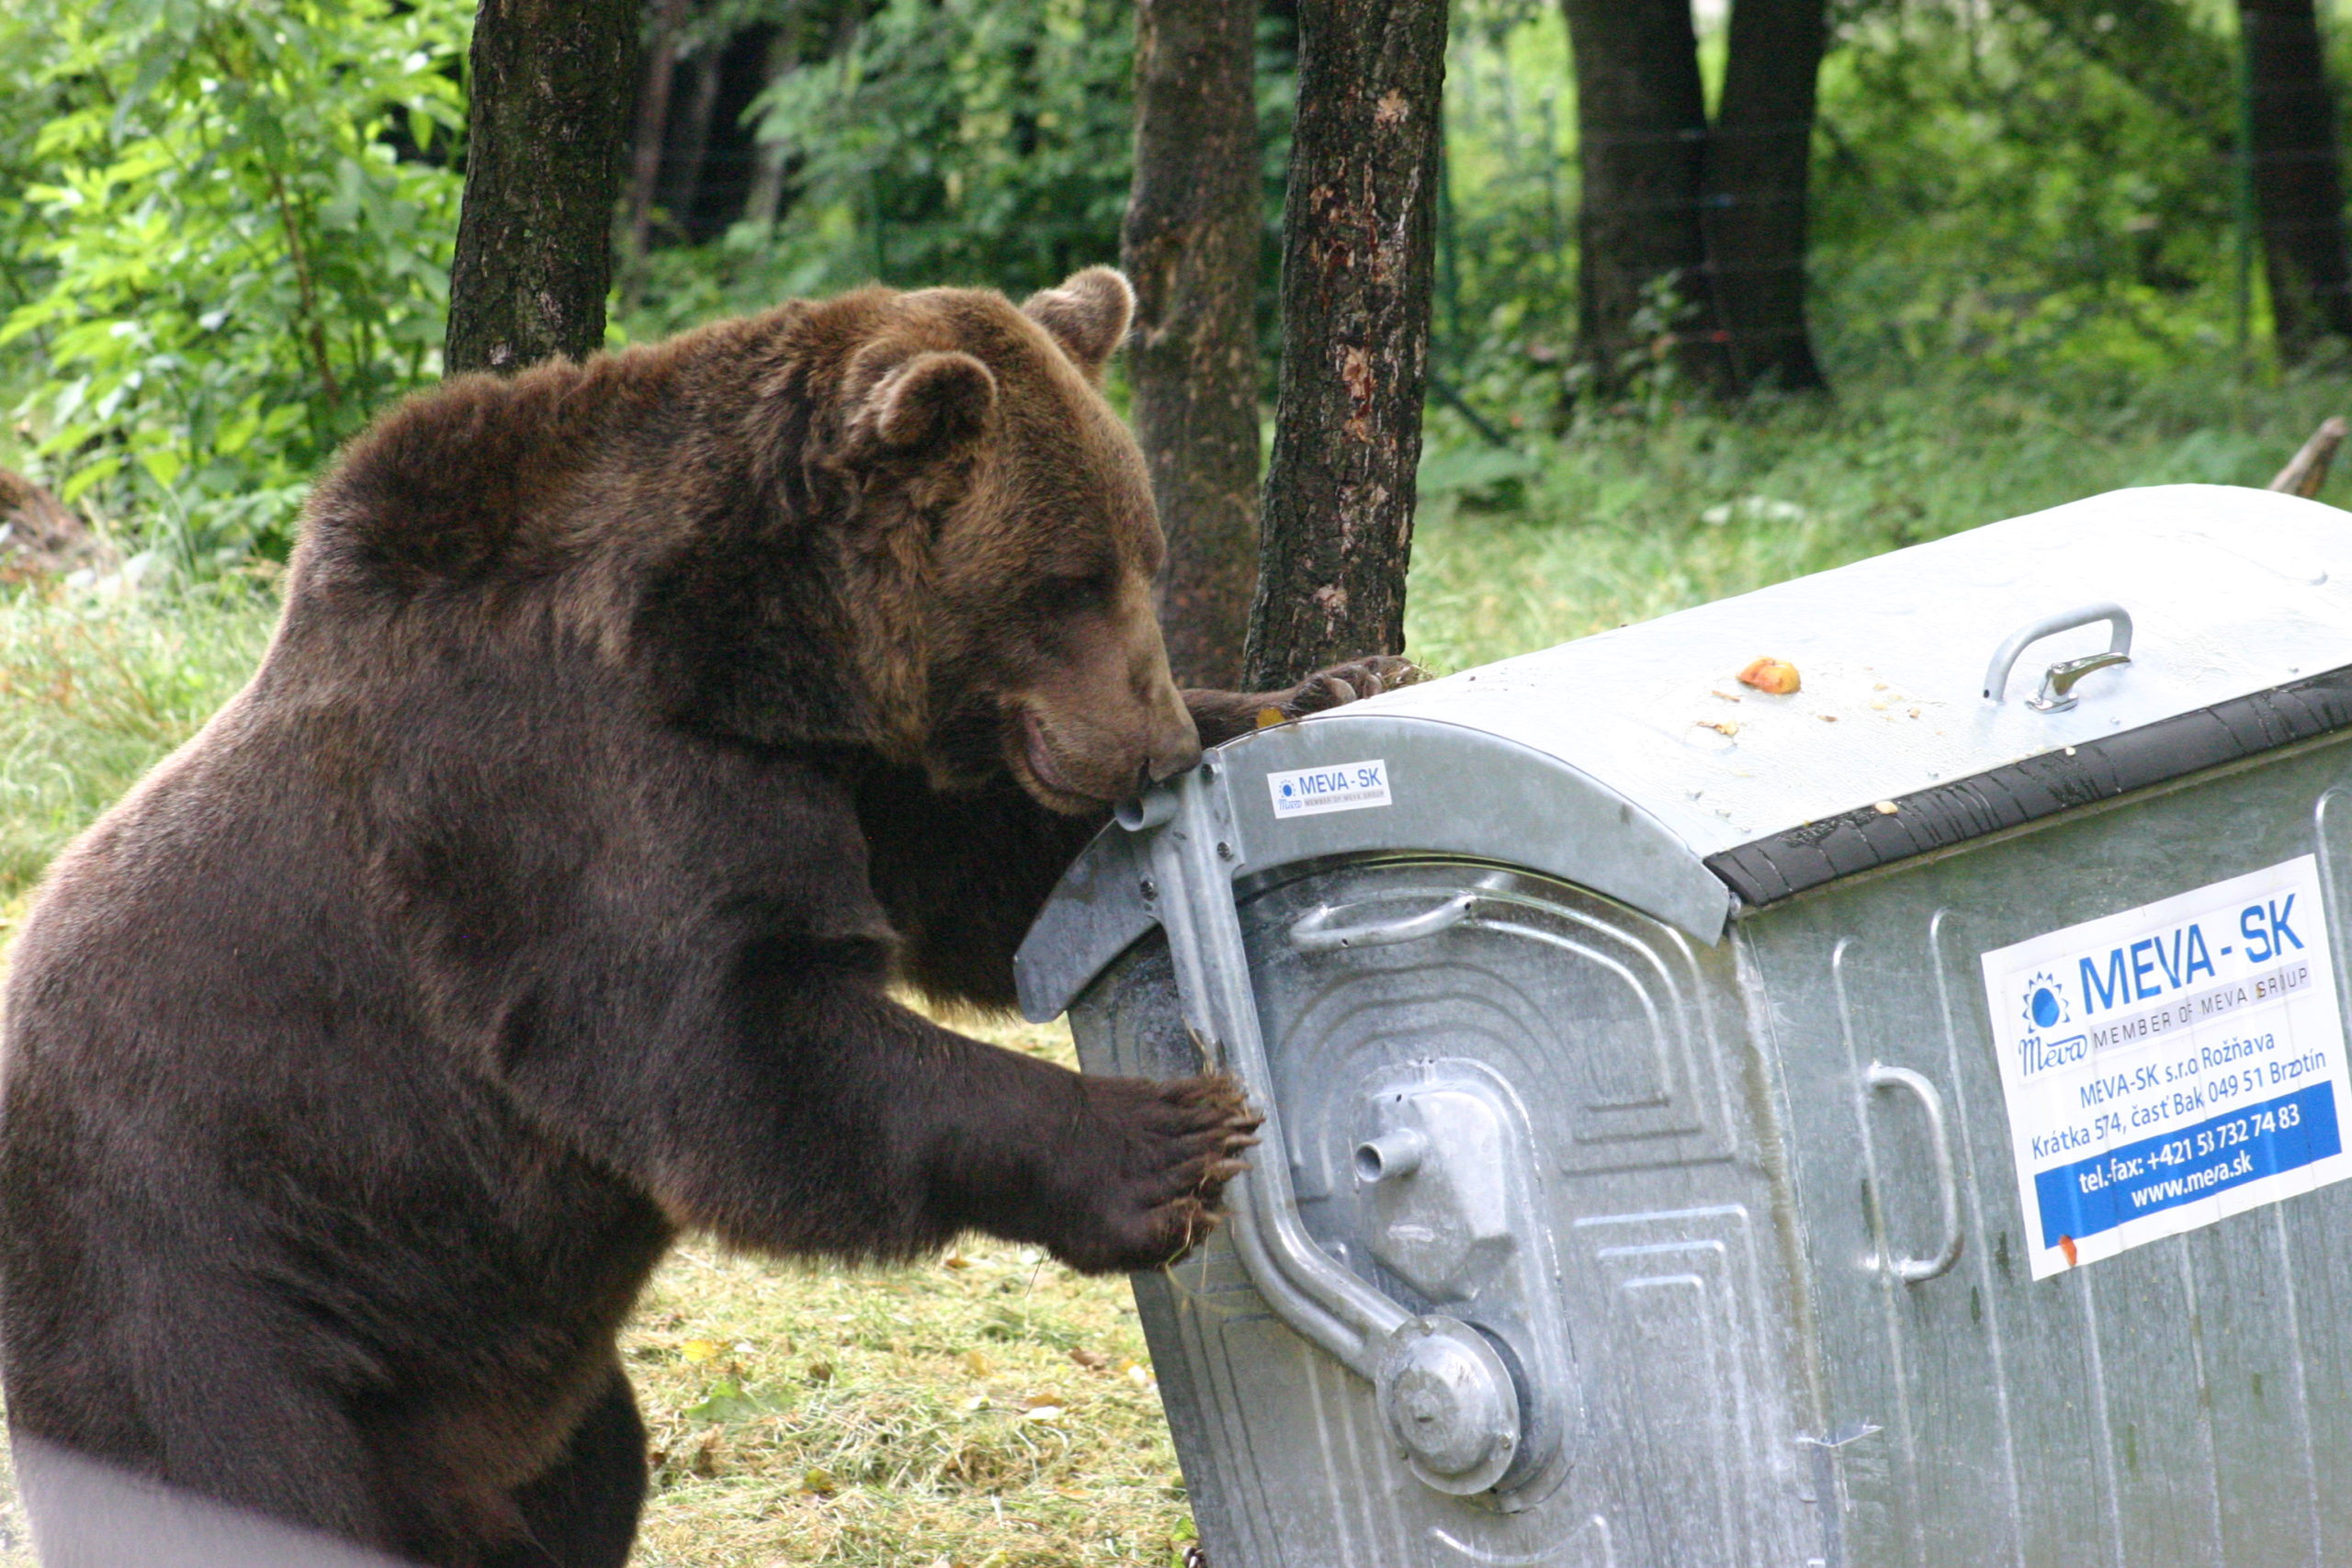 Civil society to government policy: a case study of bear management in Slovakia